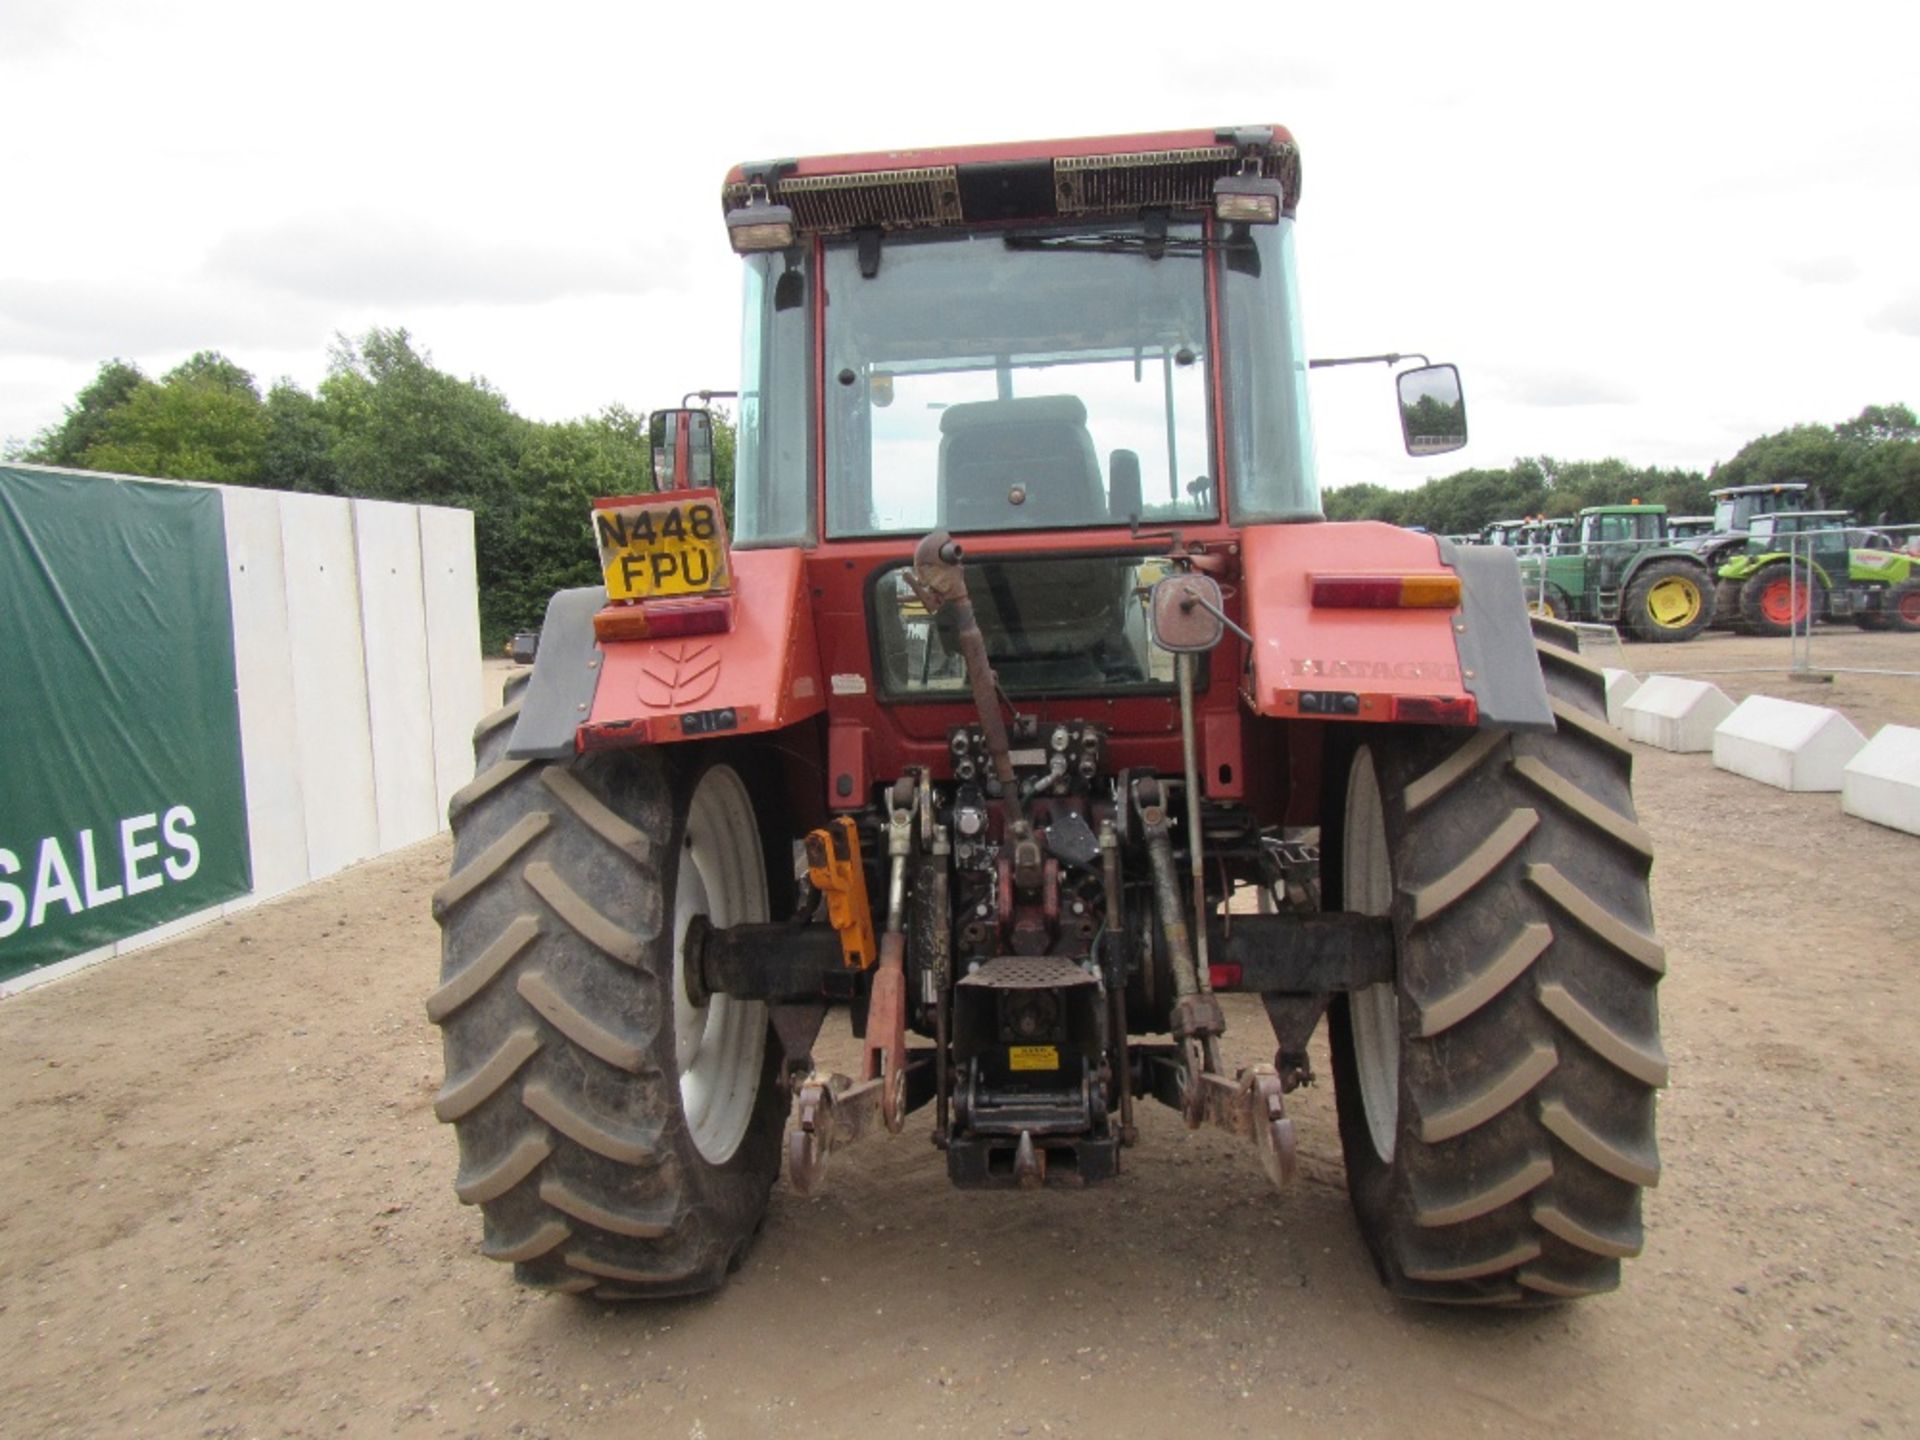 Fiat F115 Winner Tractor. Direct from farm. V5 will be supplied Reg. No. N448 FPU - Image 6 of 14